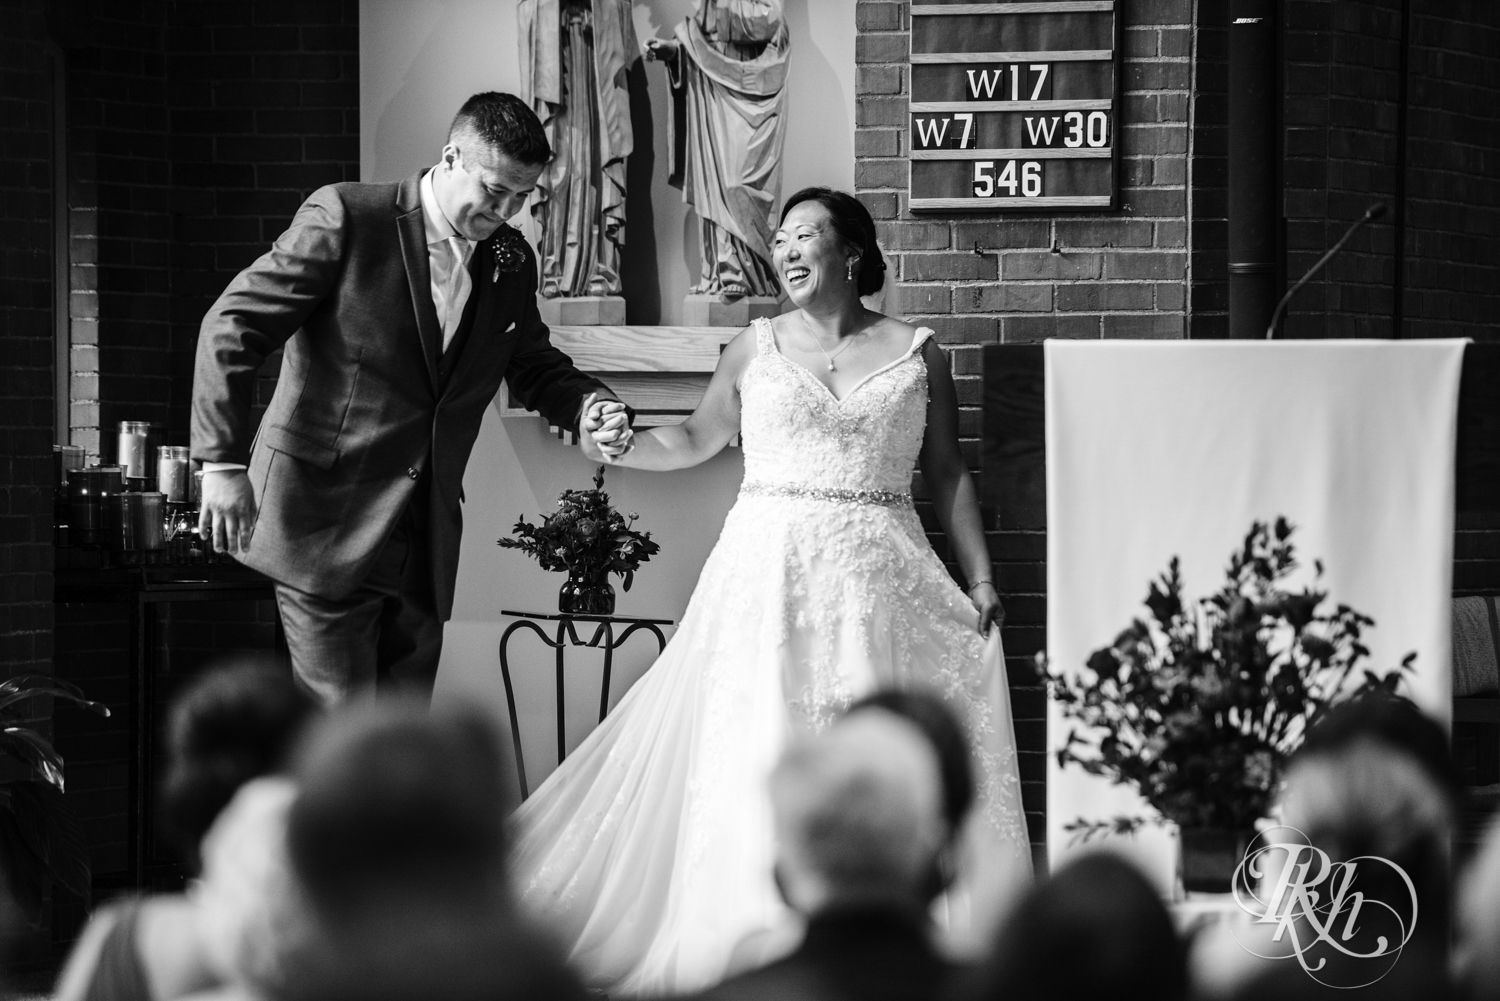 Bride and groom smile during church wedding ceremony in Minneapolis, Minnesota.